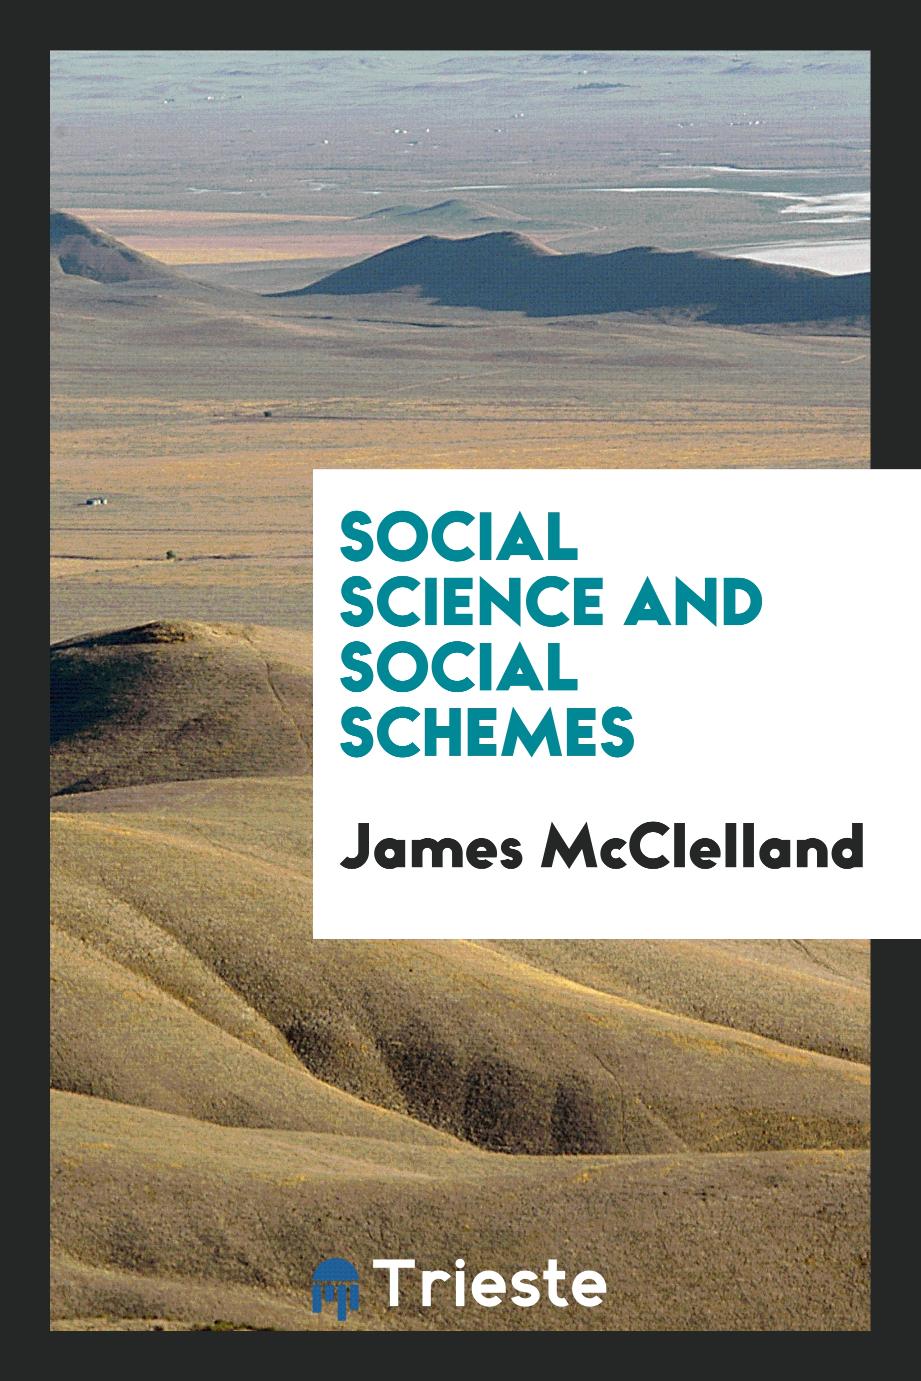 Social science and social schemes